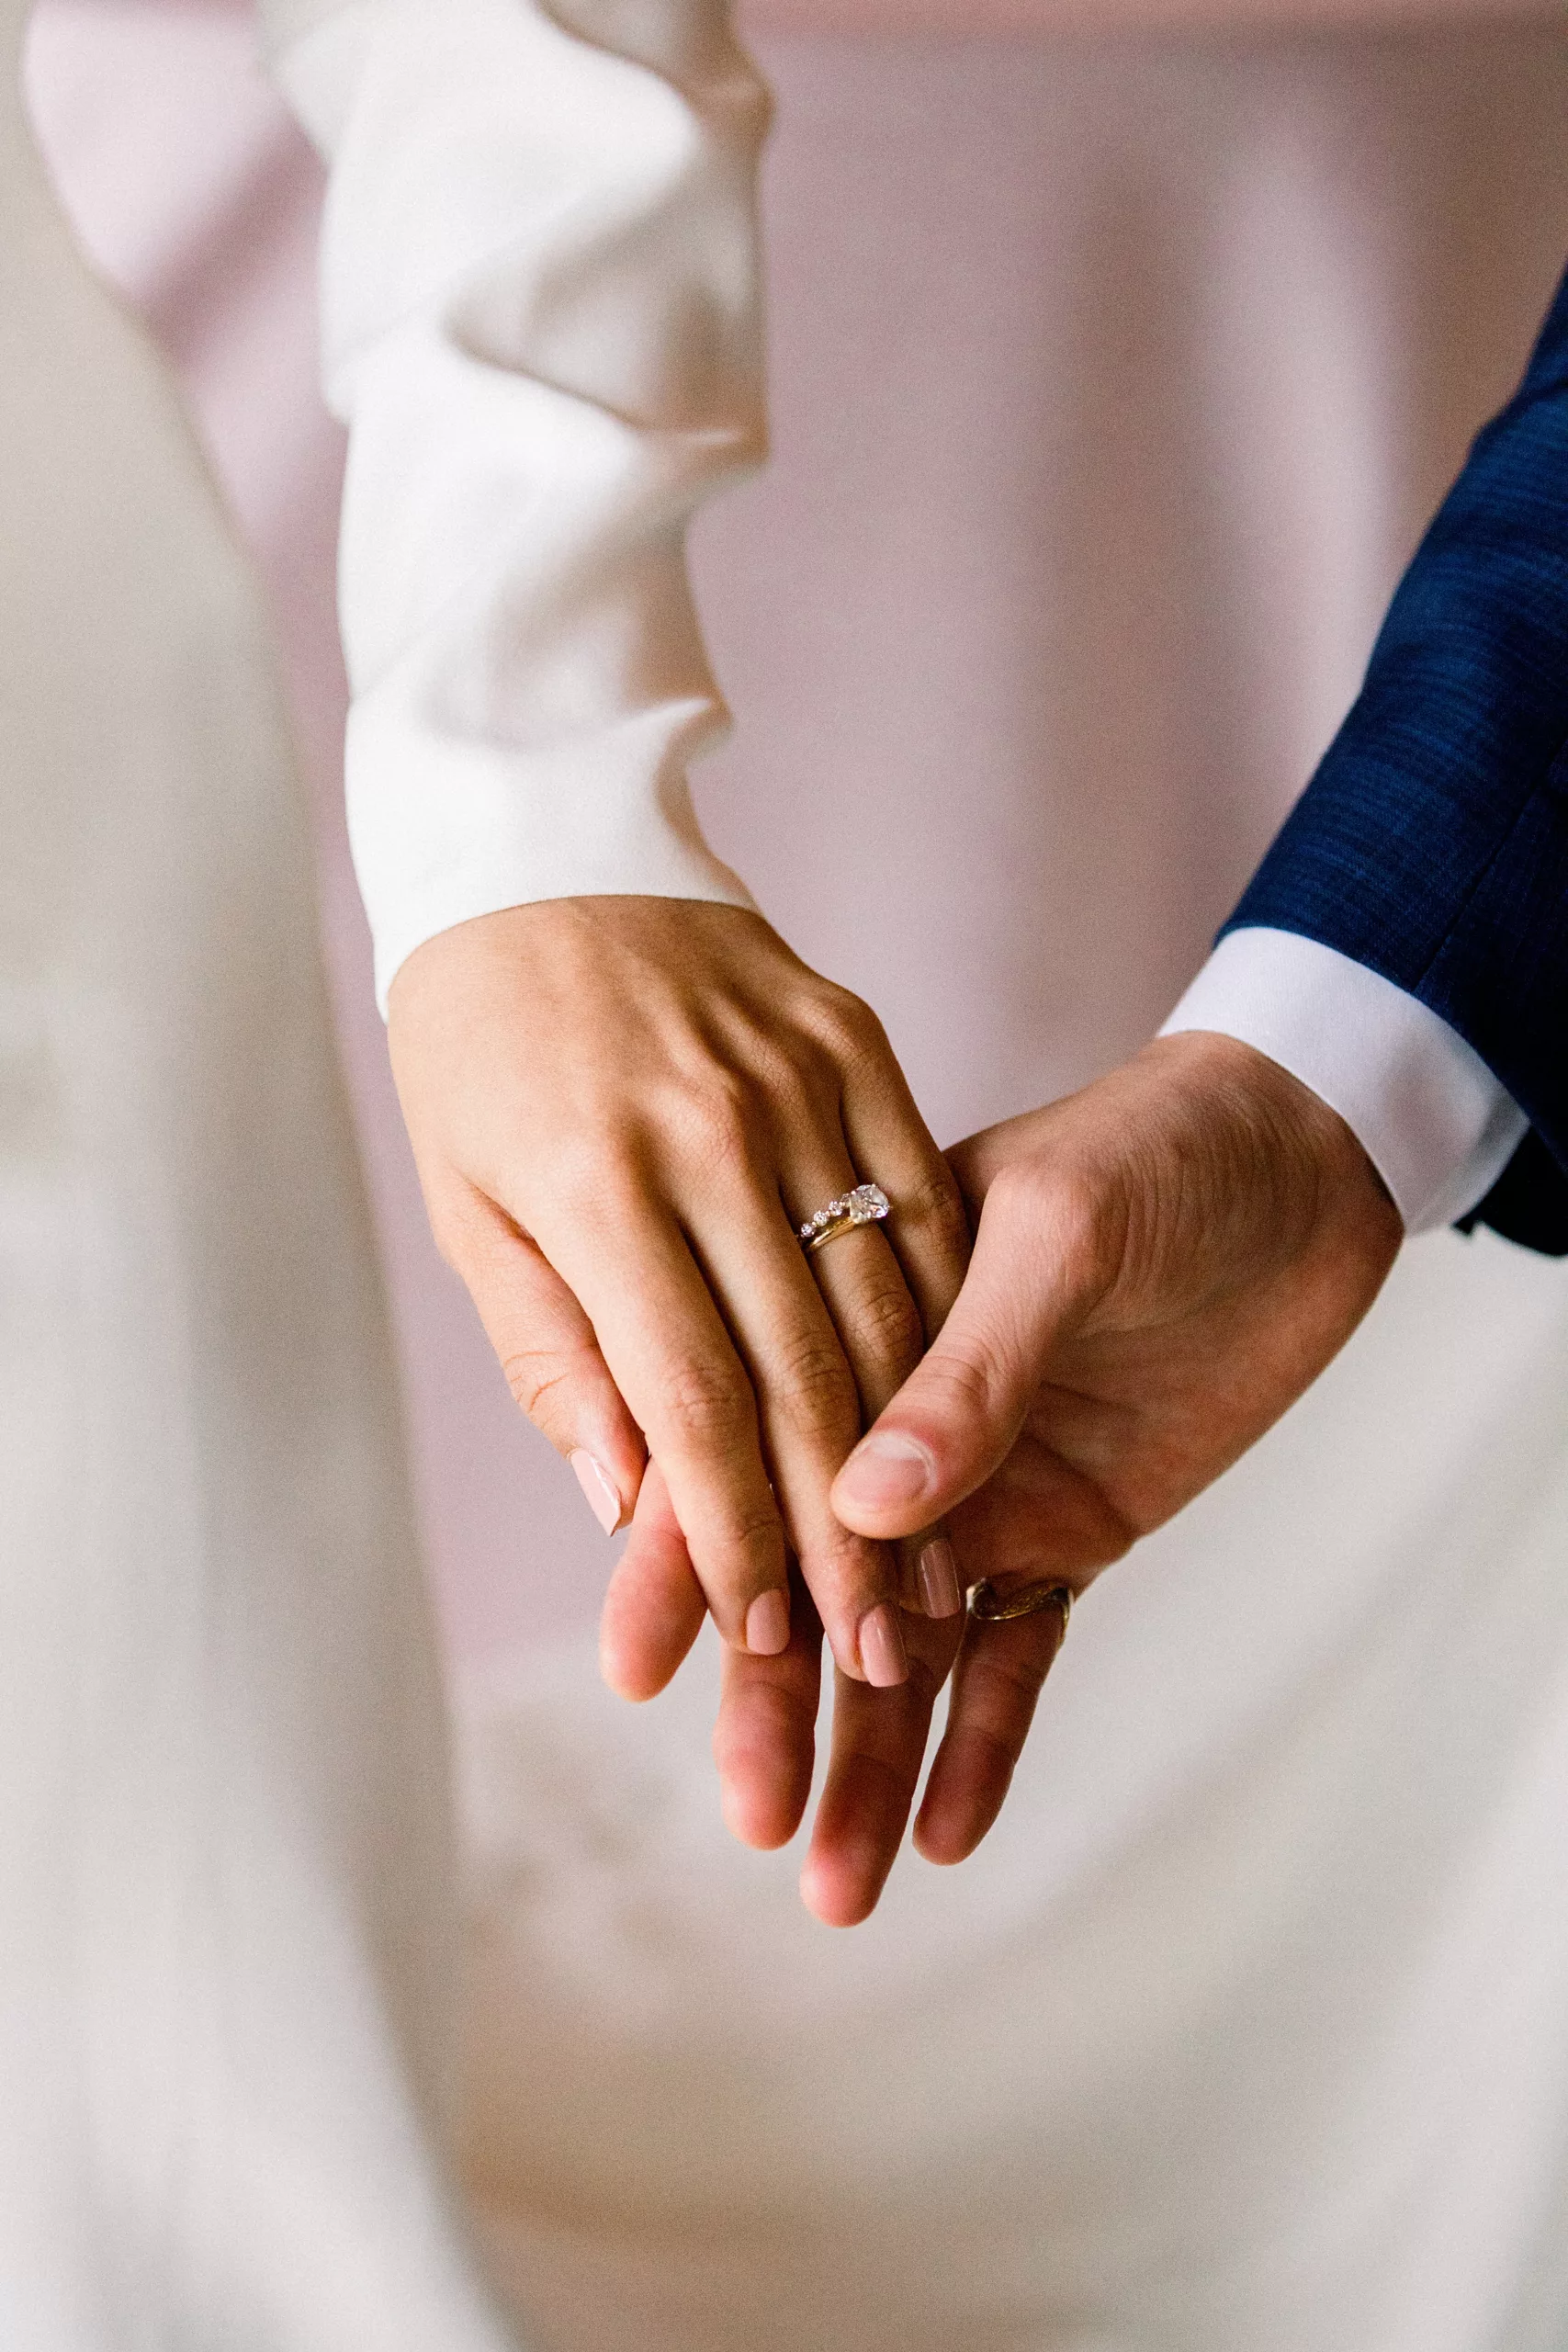 Details of newlyweds holding hands with the bride's rings